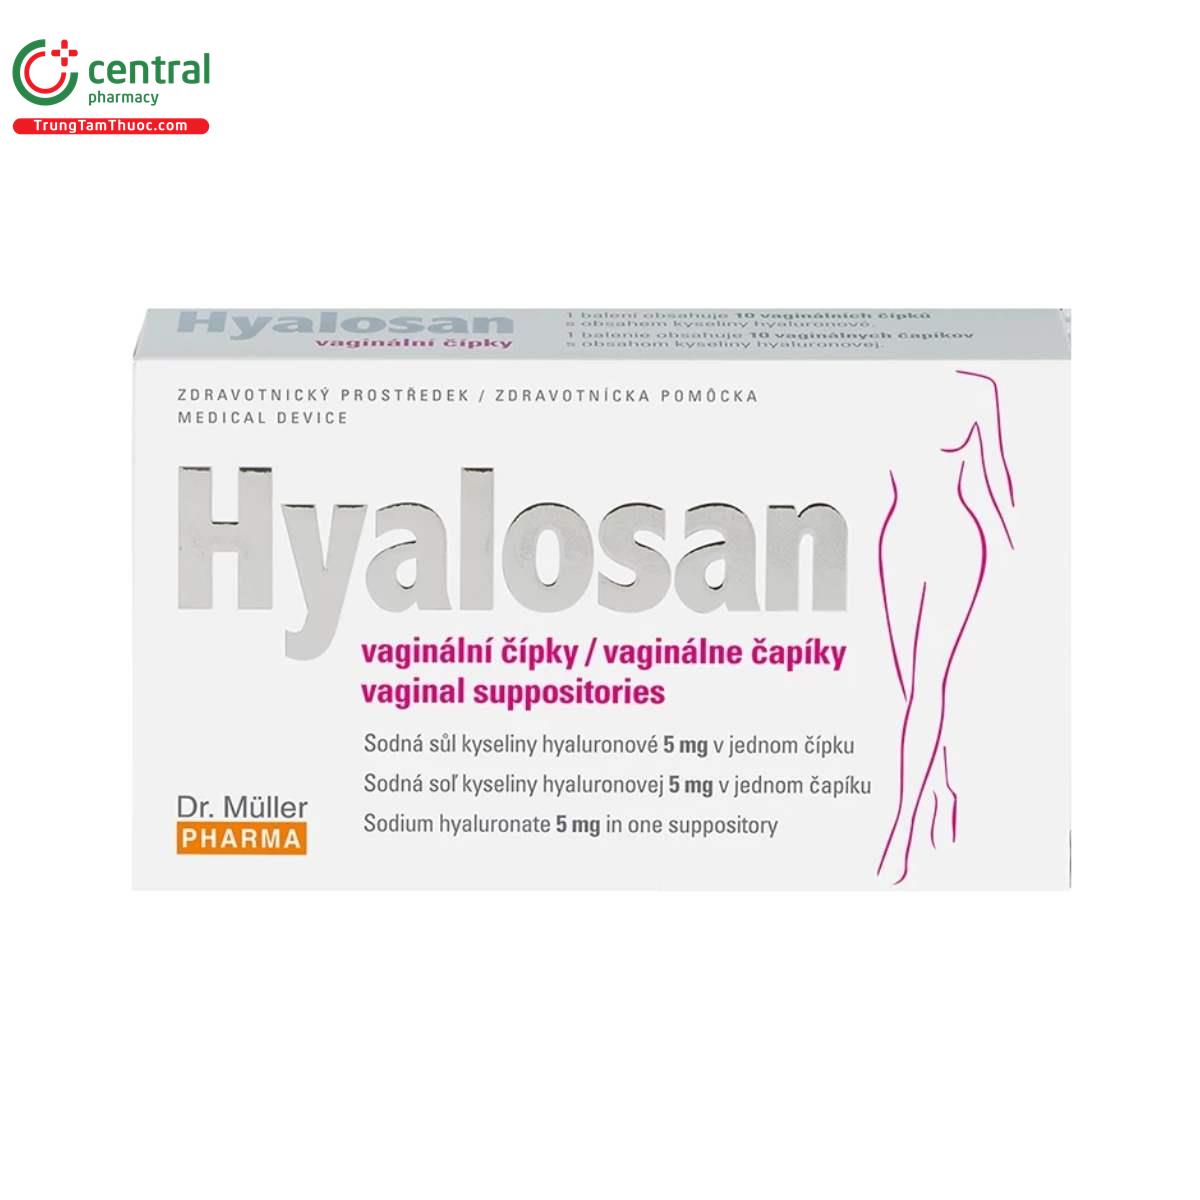 hyalosan vaginal supporities 3 O5818